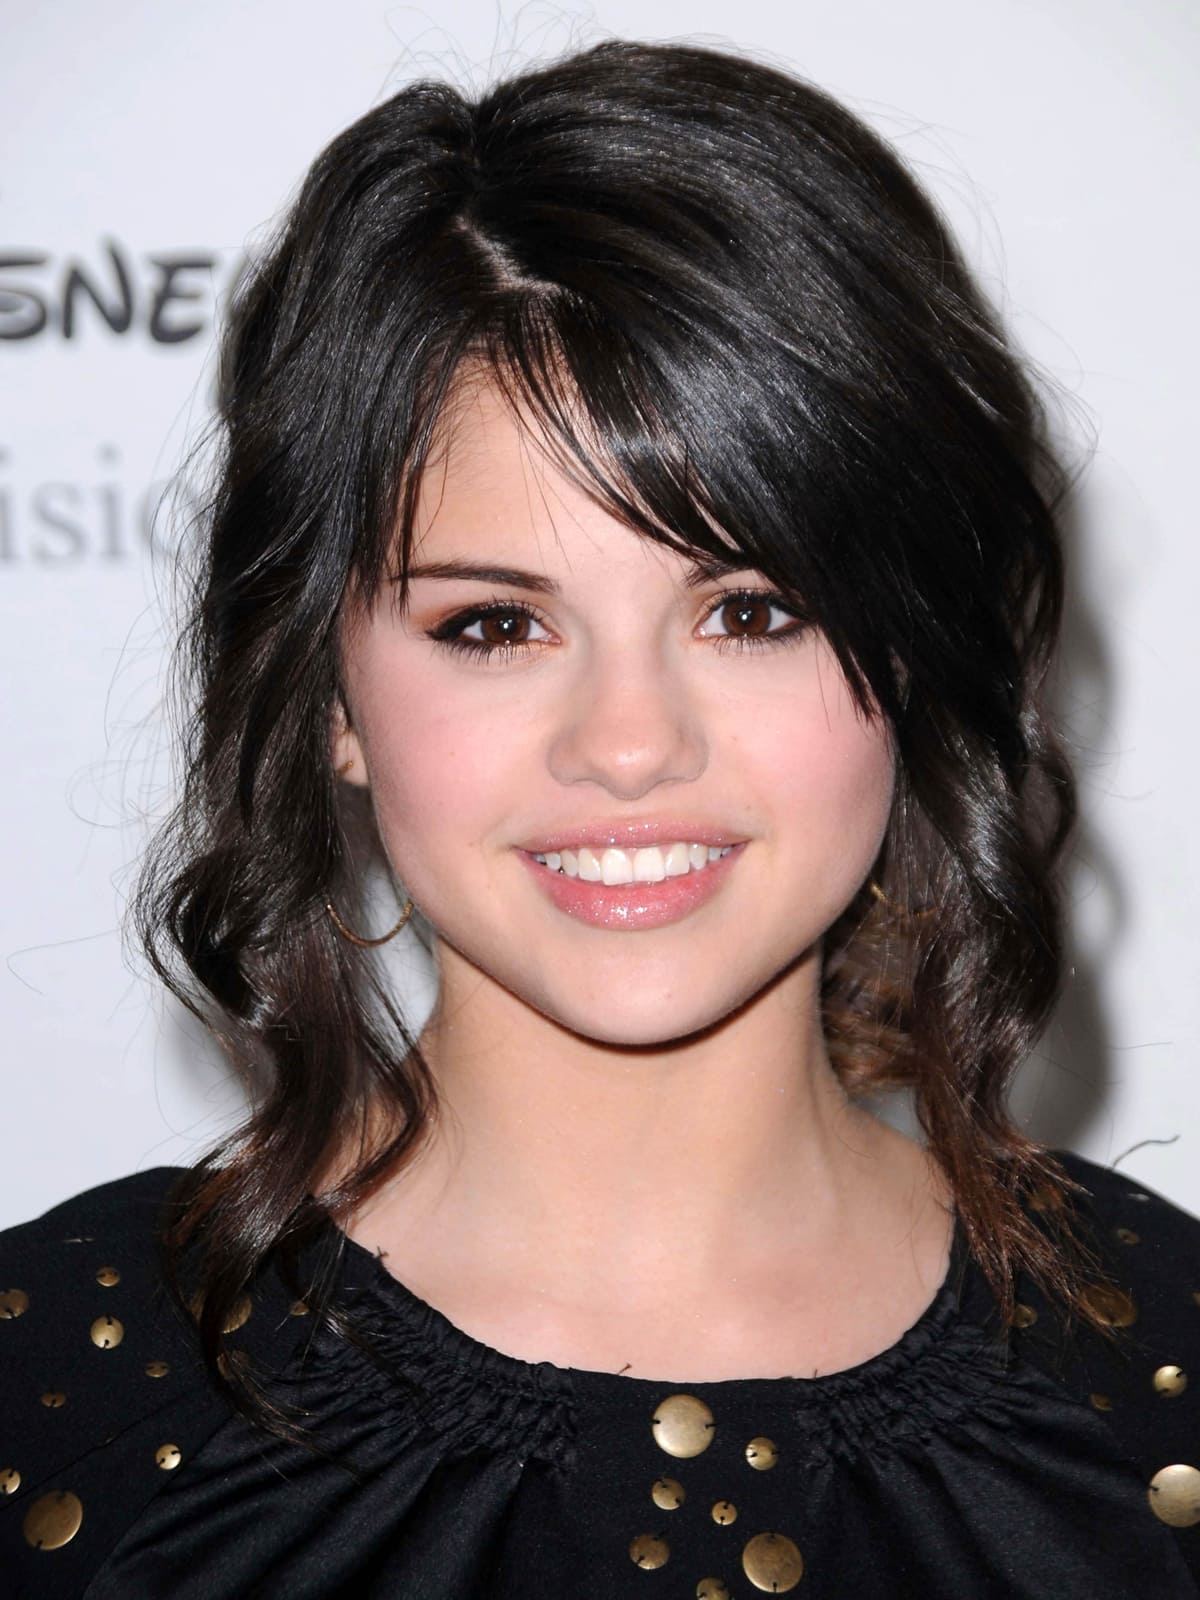 Selena Gomez became famous as a child actress and struggled as a young person in the entertainment industry